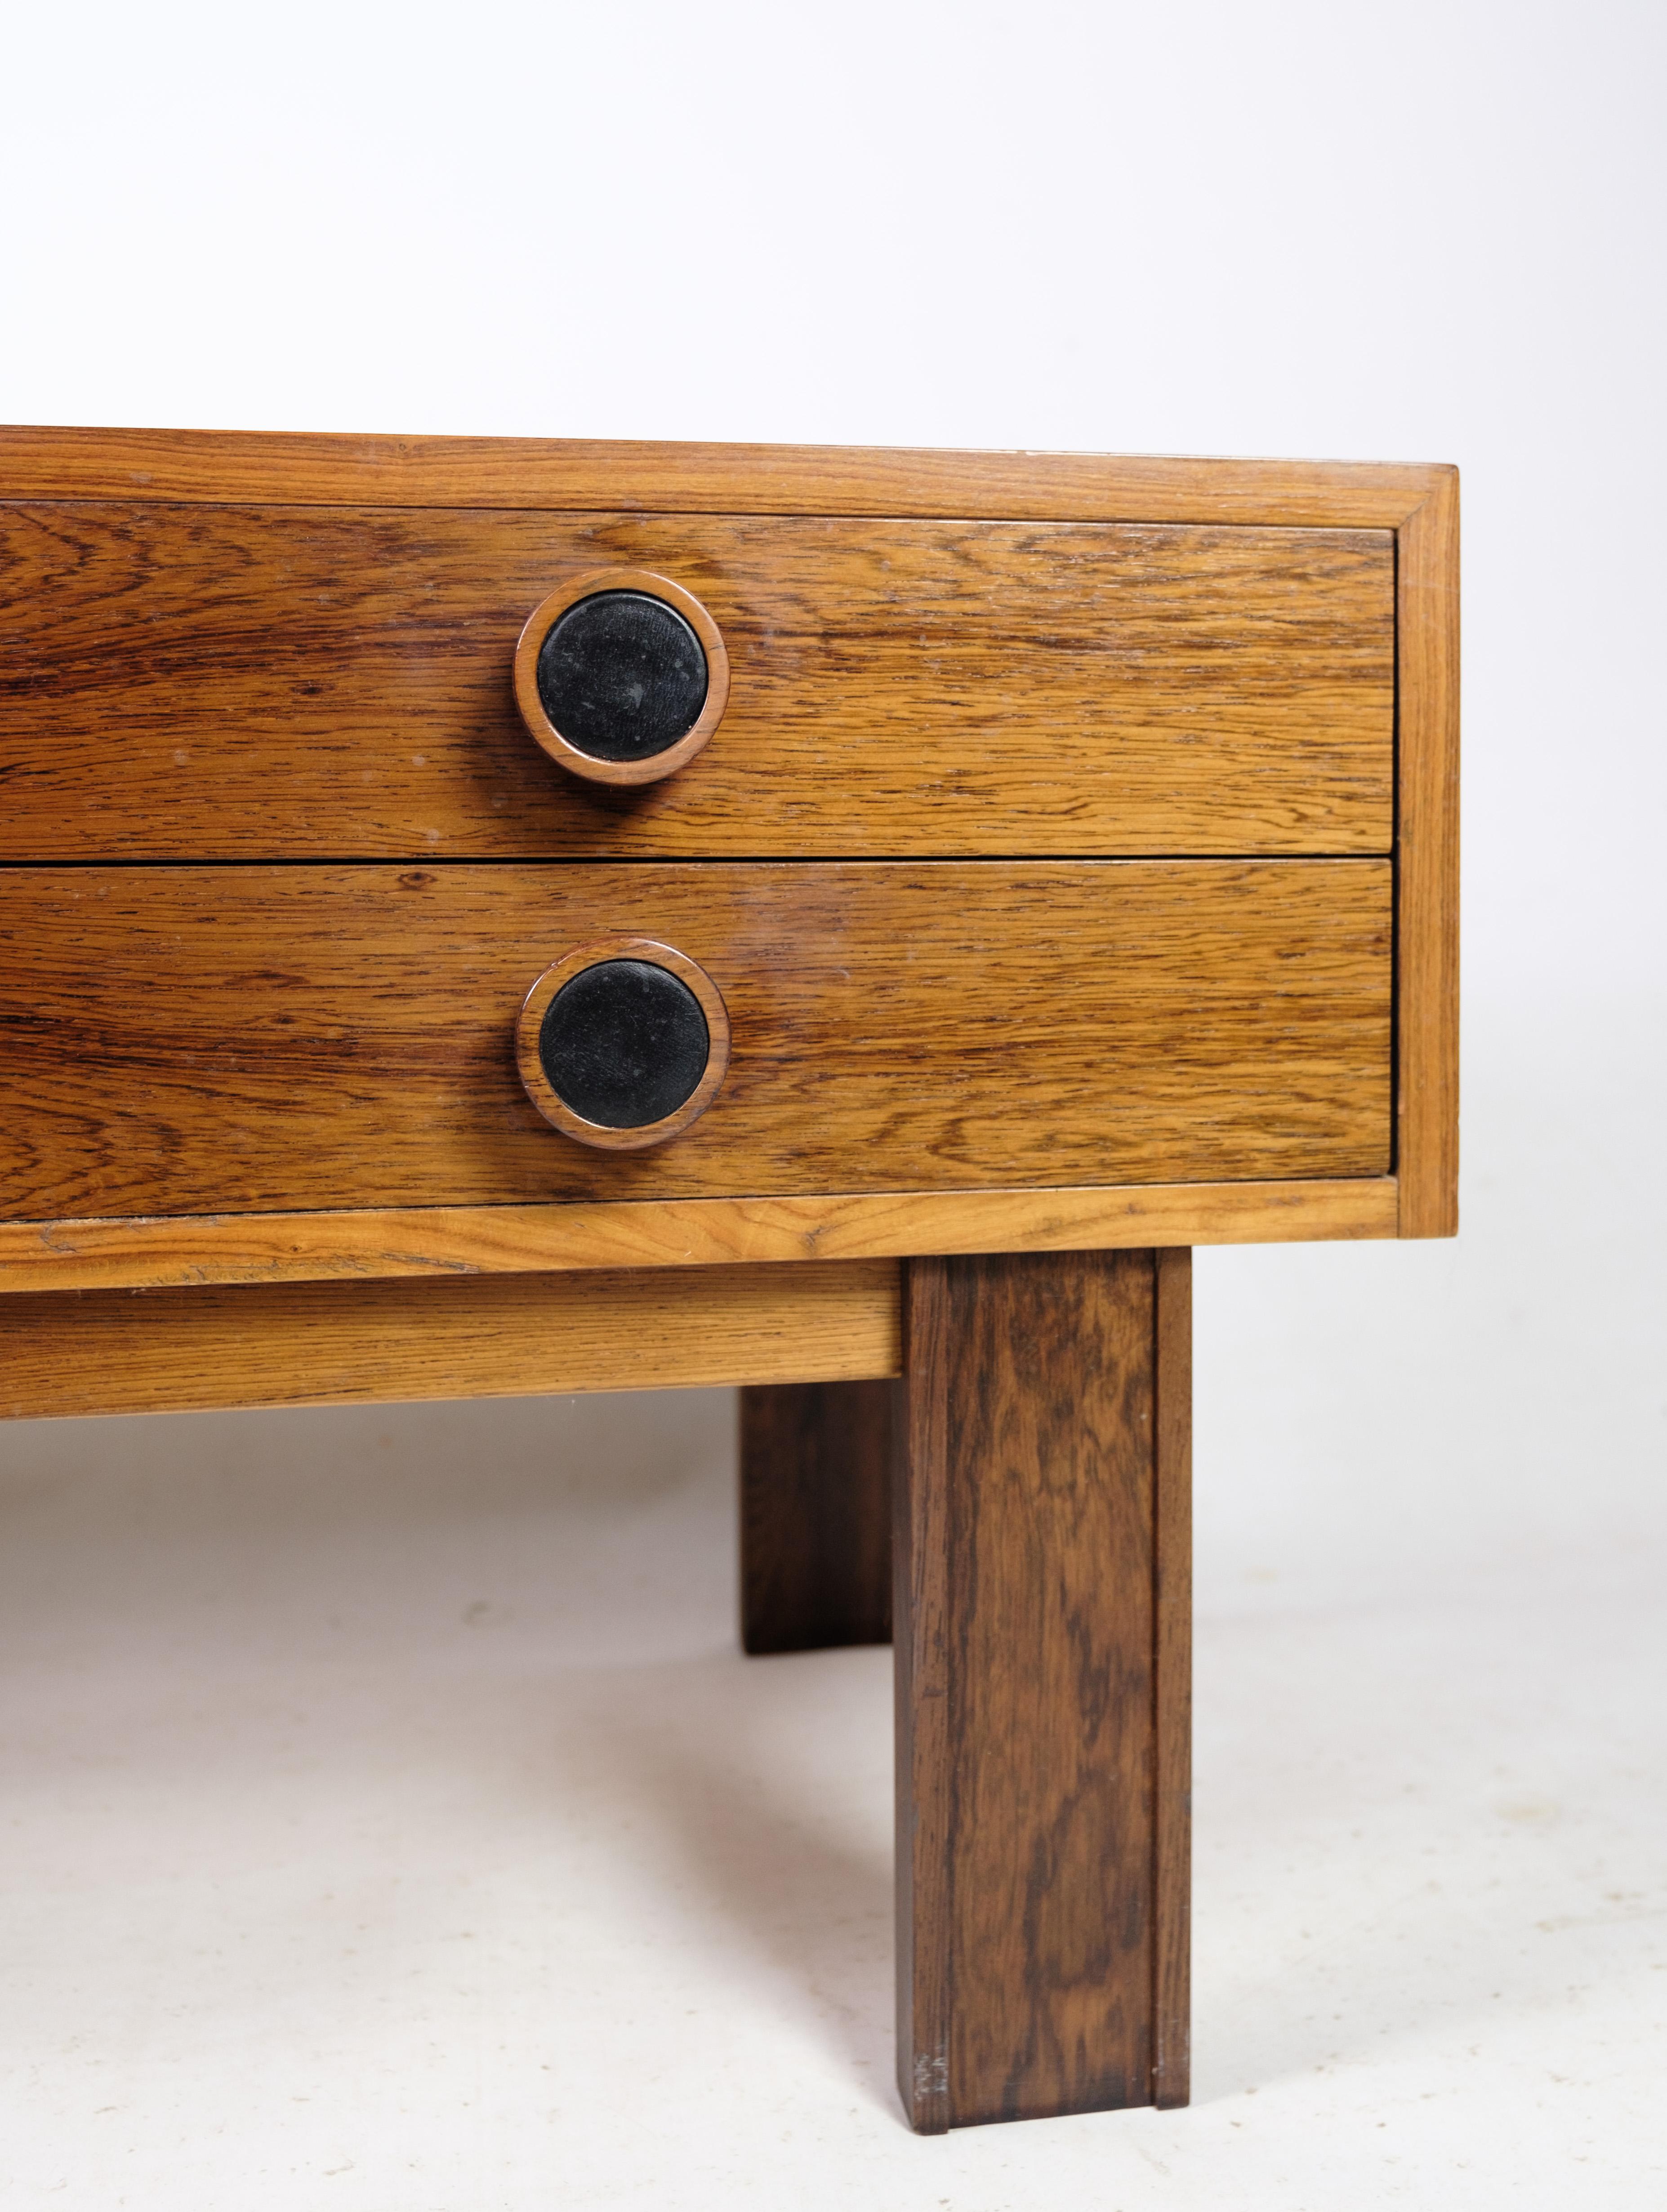 TV / entrance furniture with two smaller drawers and one larger drawer of Danish design in rosewood from around the 1960s.
Dimensions in cm: H:43 W:110 D:40.